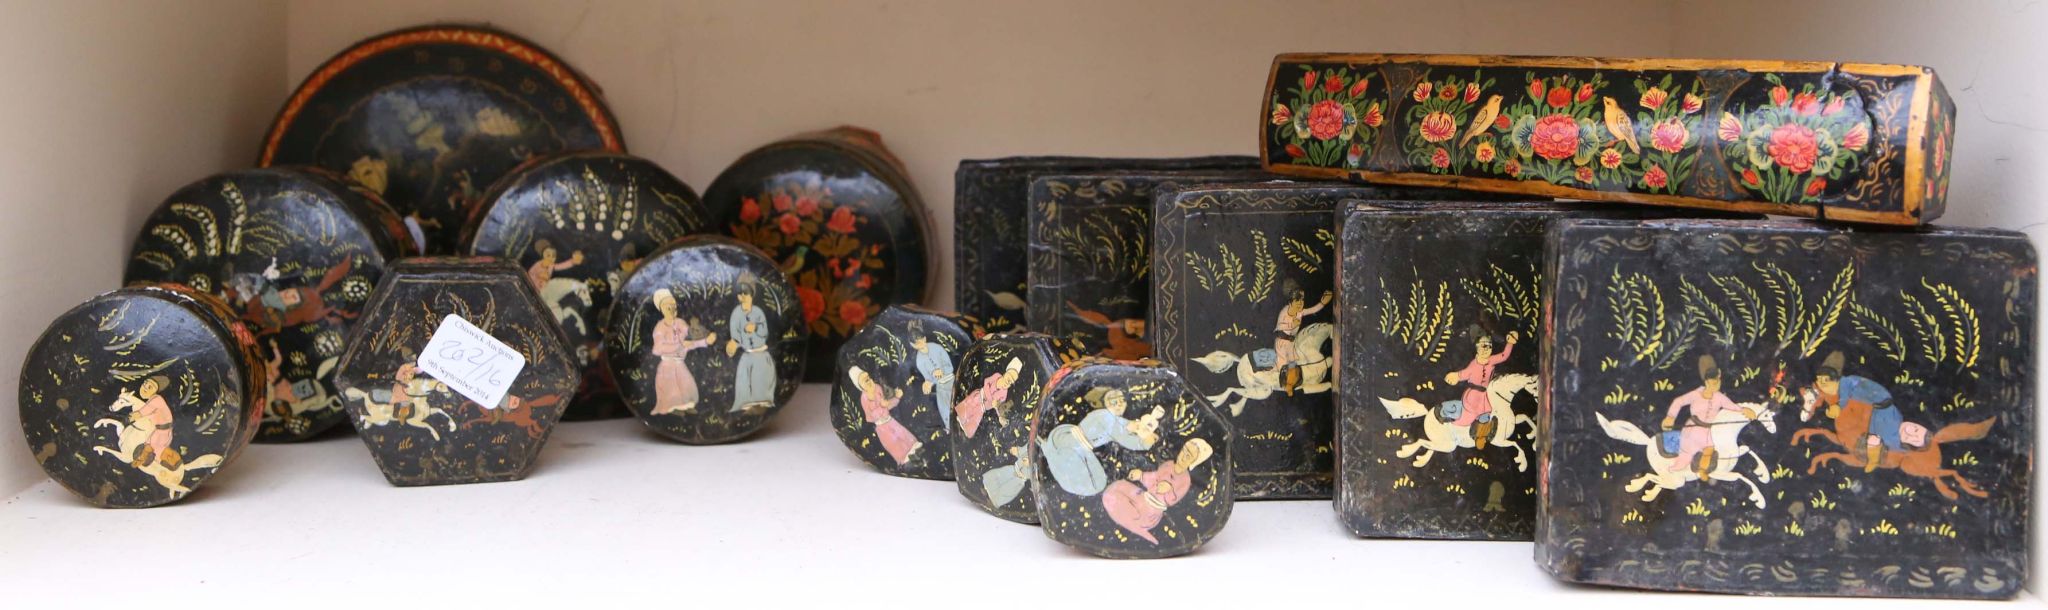 A selection of sixteen Indo / Persian painted and lacquered boxes, including powder boxes, pen